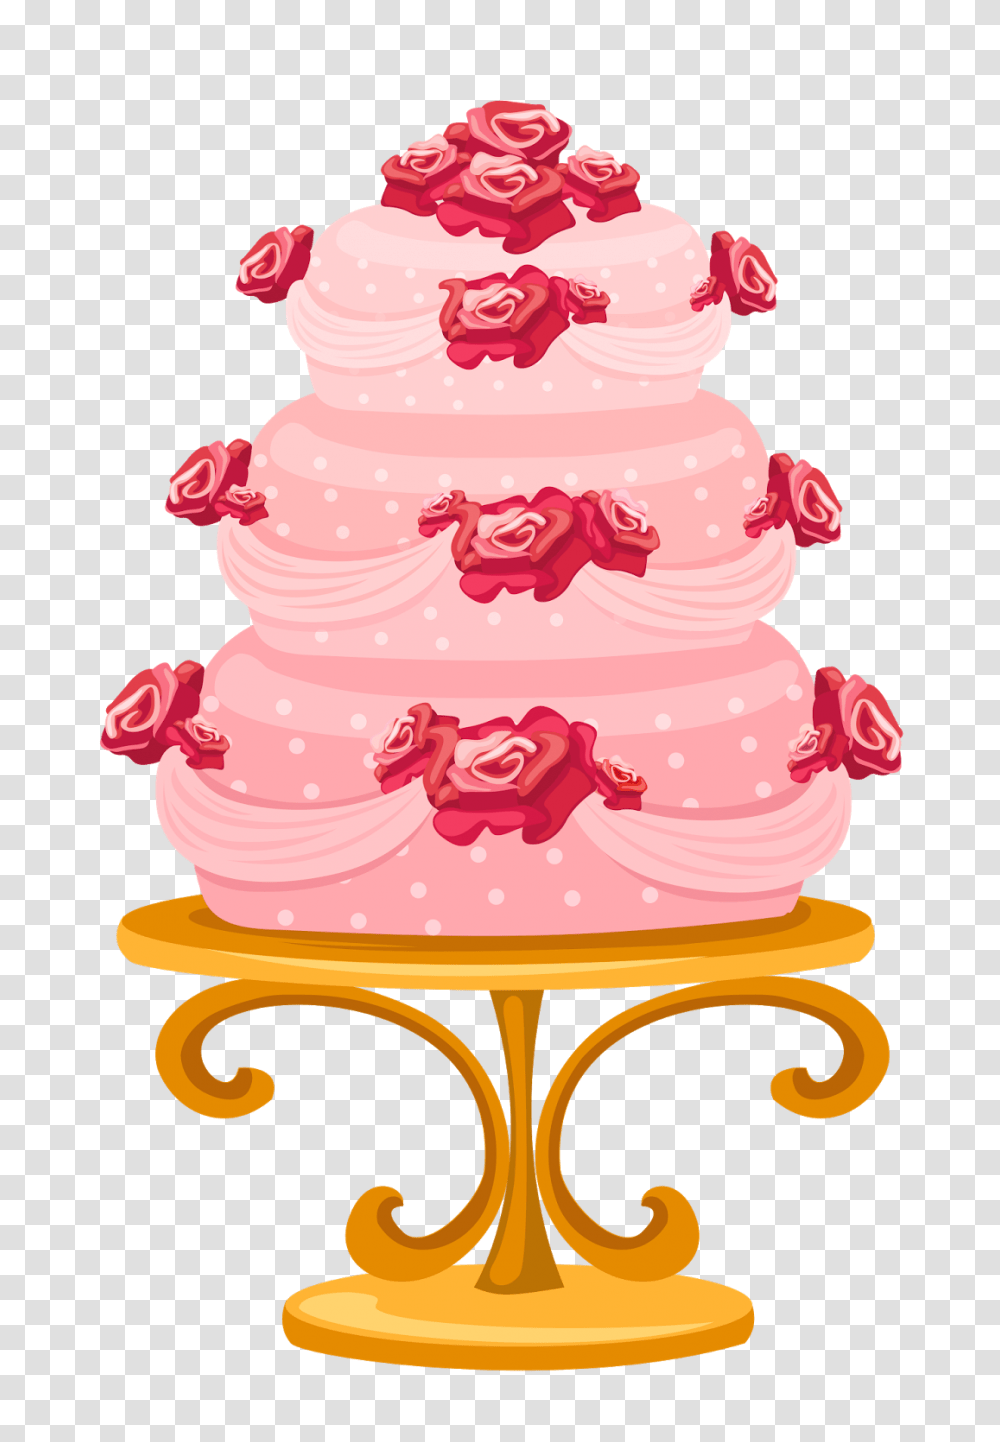 Greetings And Wishes Clip, Dessert, Food, Cake, Wedding Cake Transparent Png